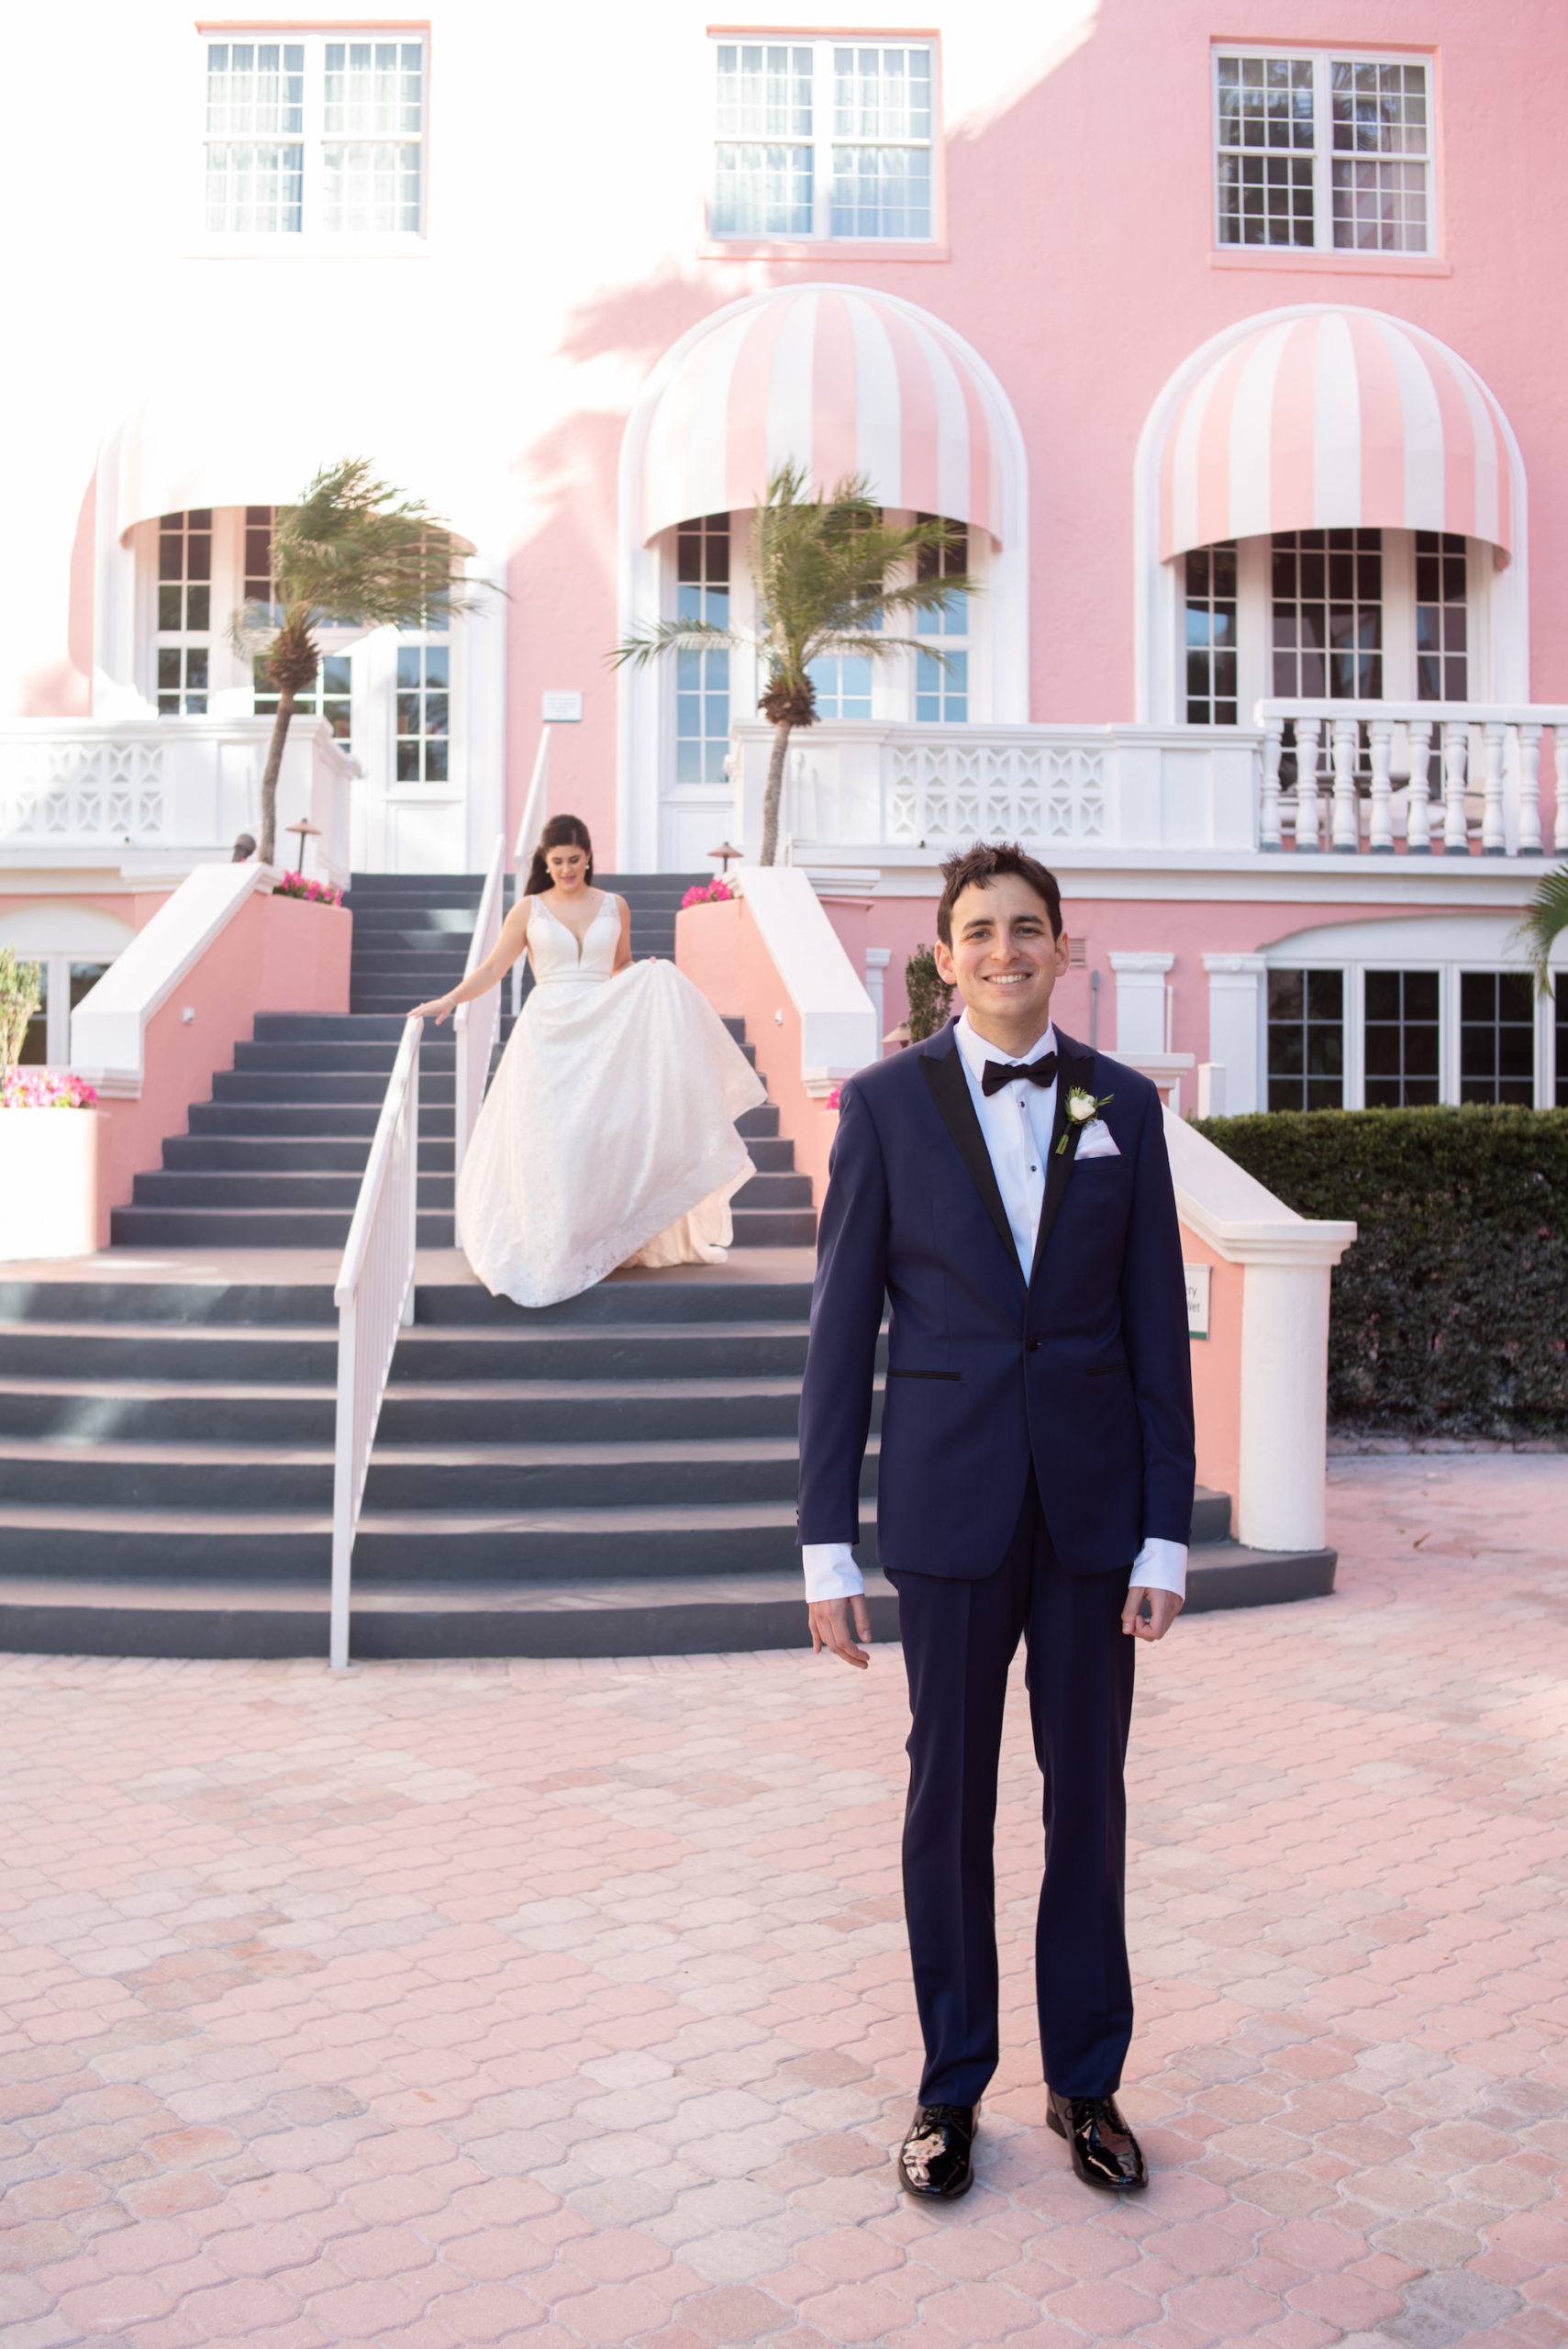 Florida Bride Walking Towards Groom First Look Wedding Portrait | The Pink Palace | St. Petersburg Waterfront Wedding Venue The Don CeSar